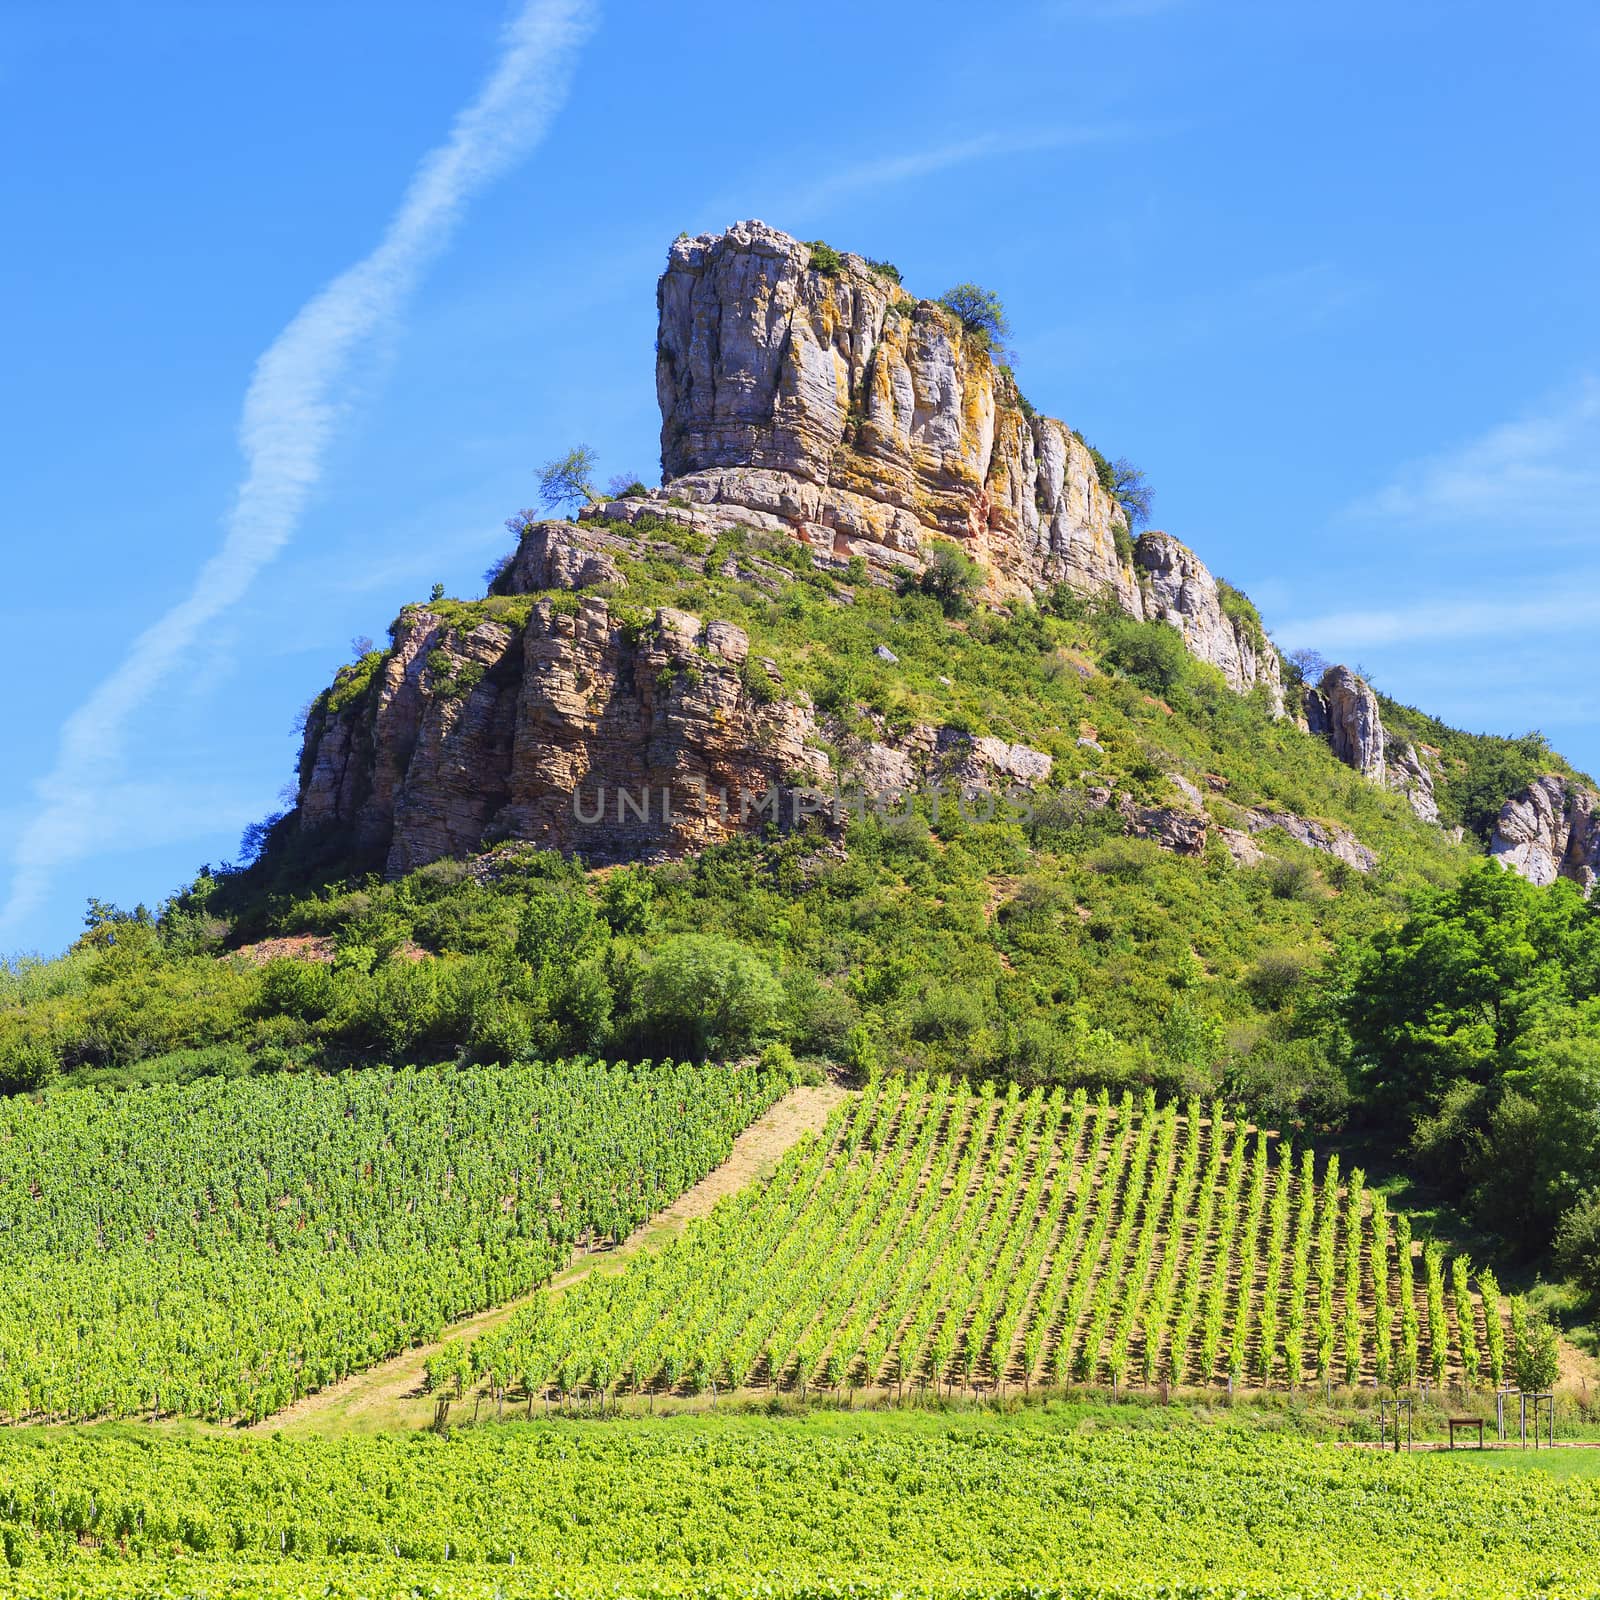 famous Solutre Rock with vineyards in Burgundy, France